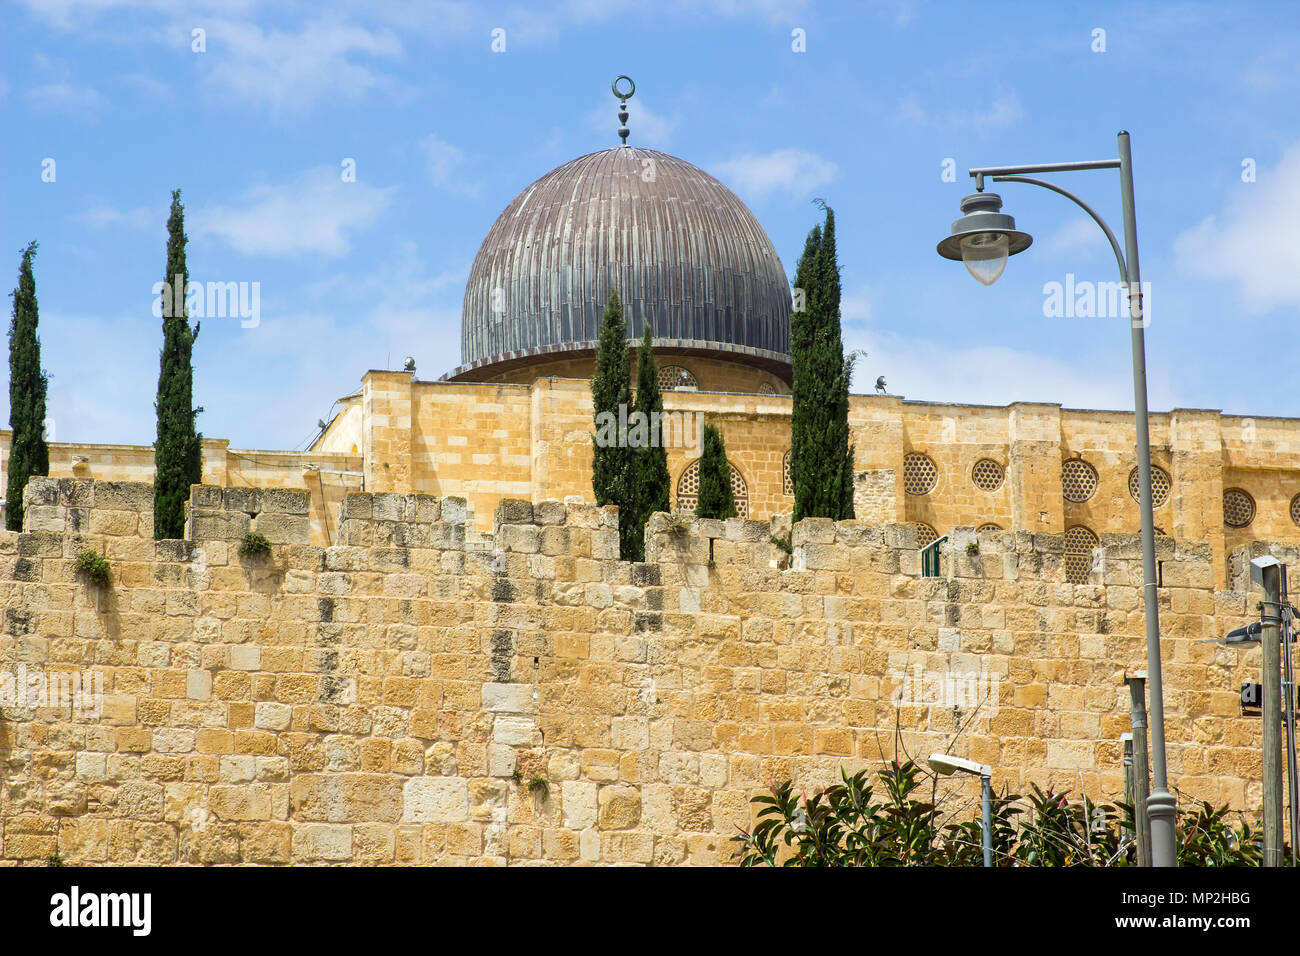 The dome of the famous Al Agsa Mosque in the City of Jerusalem the third most holy place in the world according to Islamic tradition Stock Photo